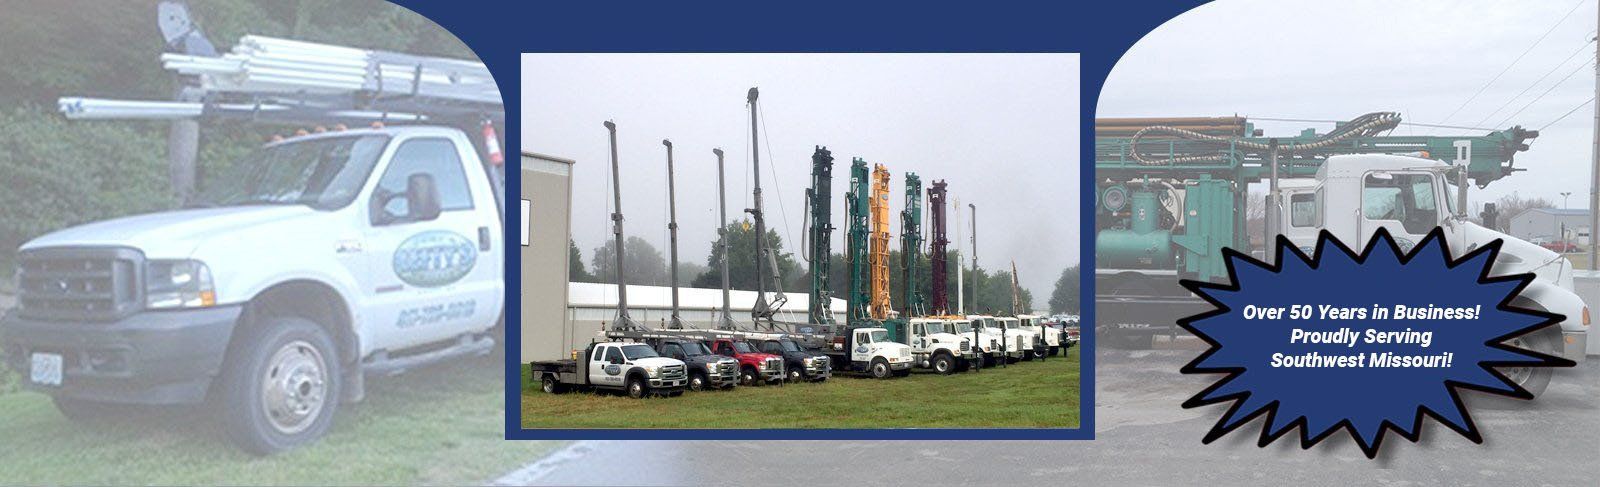 The image of trucks used for residential water well pump replacement in Springfield, MO